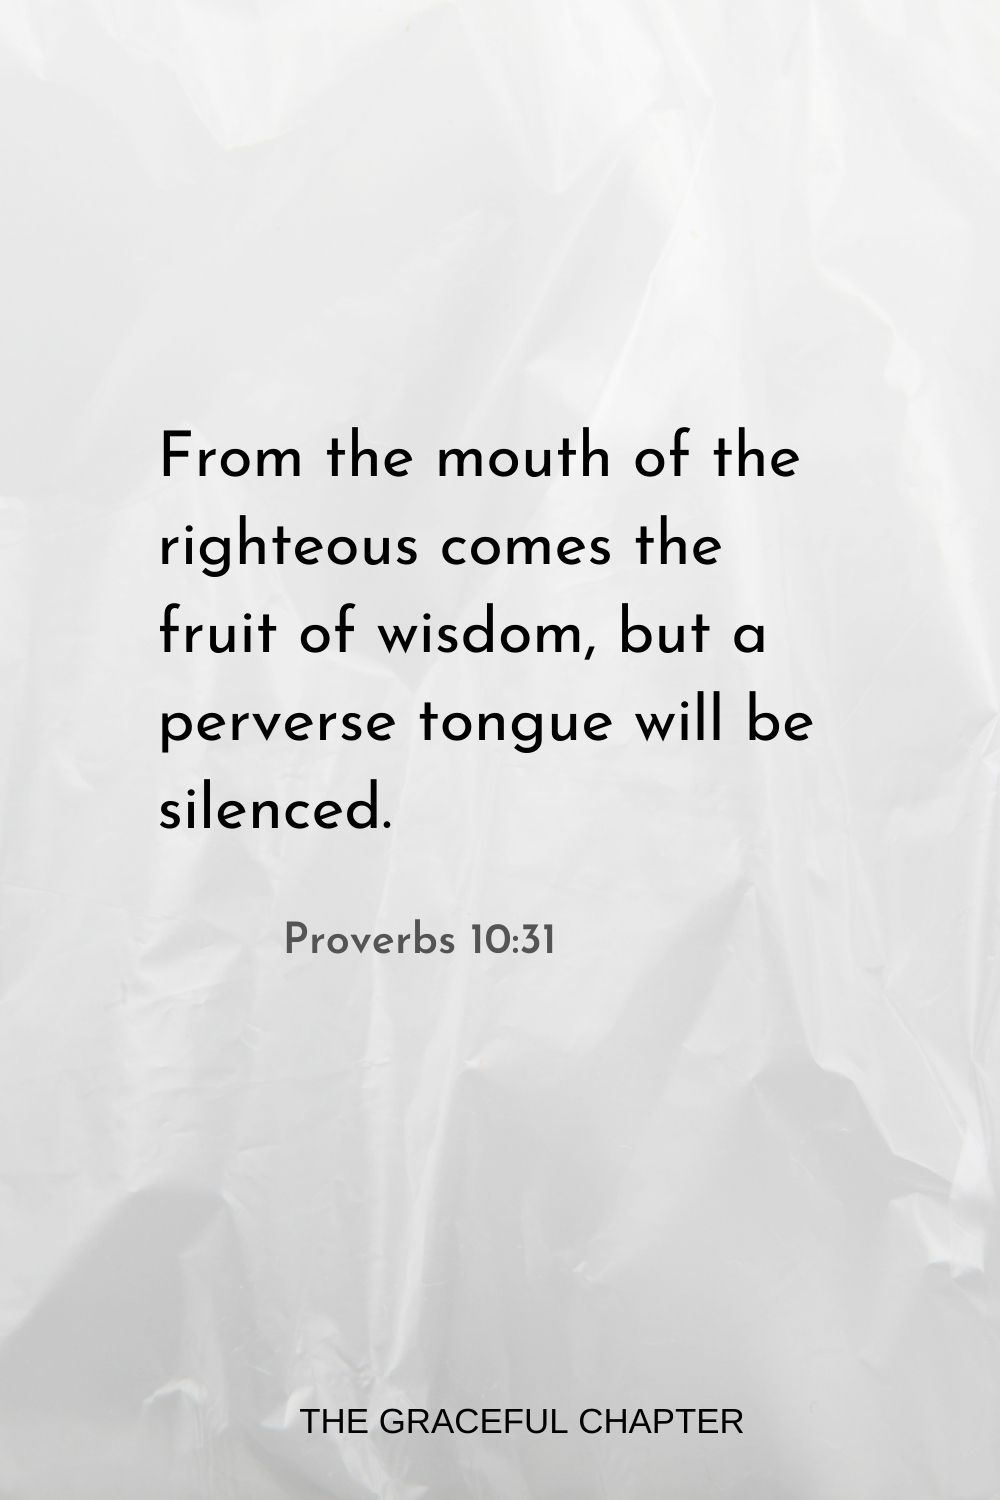 From the mouth of the righteous comes the fruit of wisdom, but a perverse tongue will be silenced. Proverbs 10:31